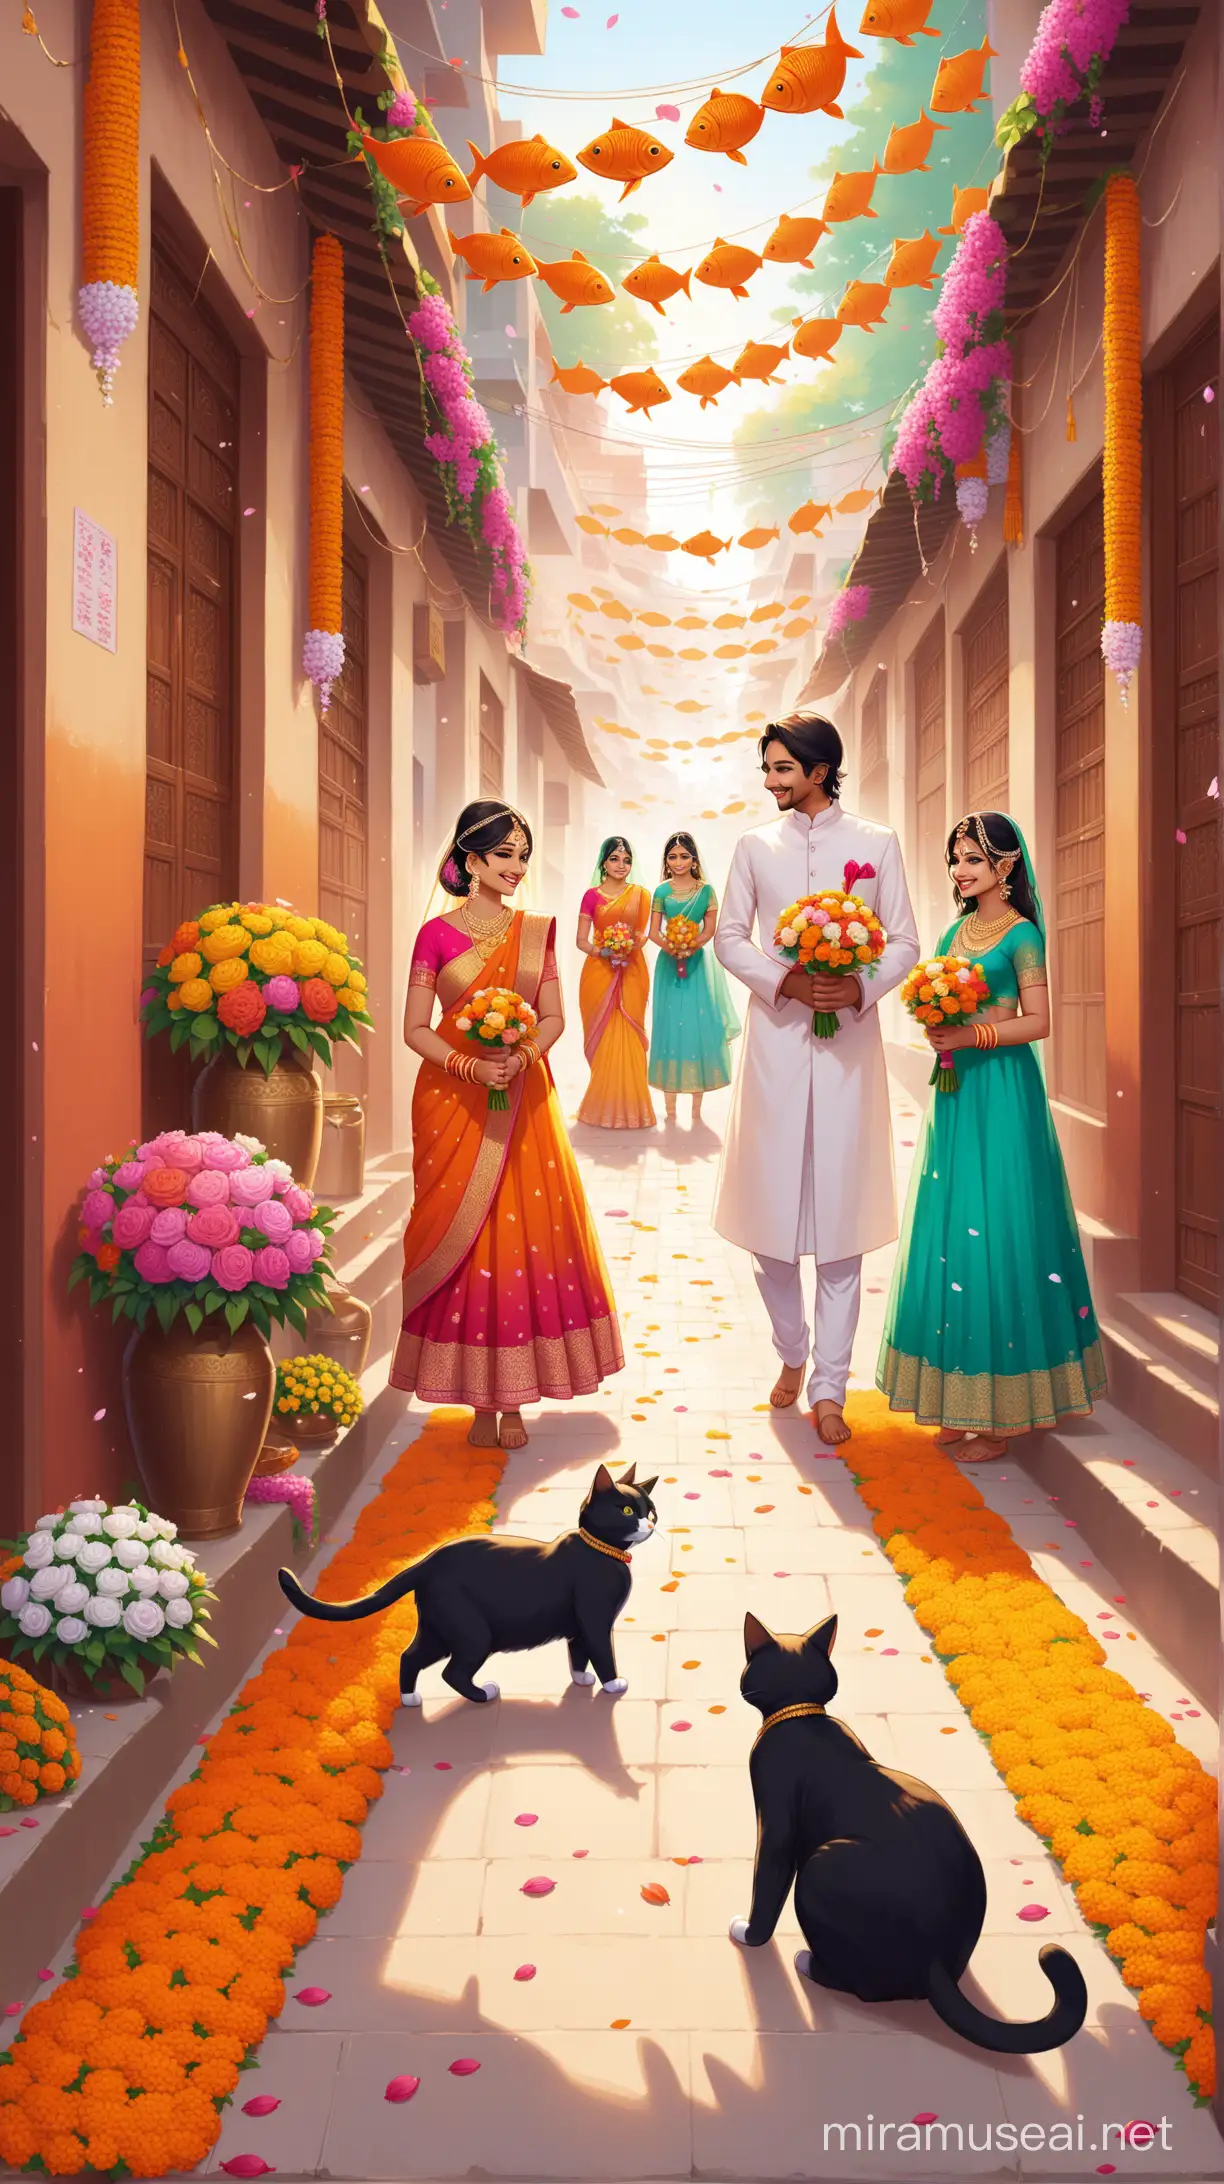 The two cats have a joyful wedding on the Indian street, with plenty of flowers and fish.